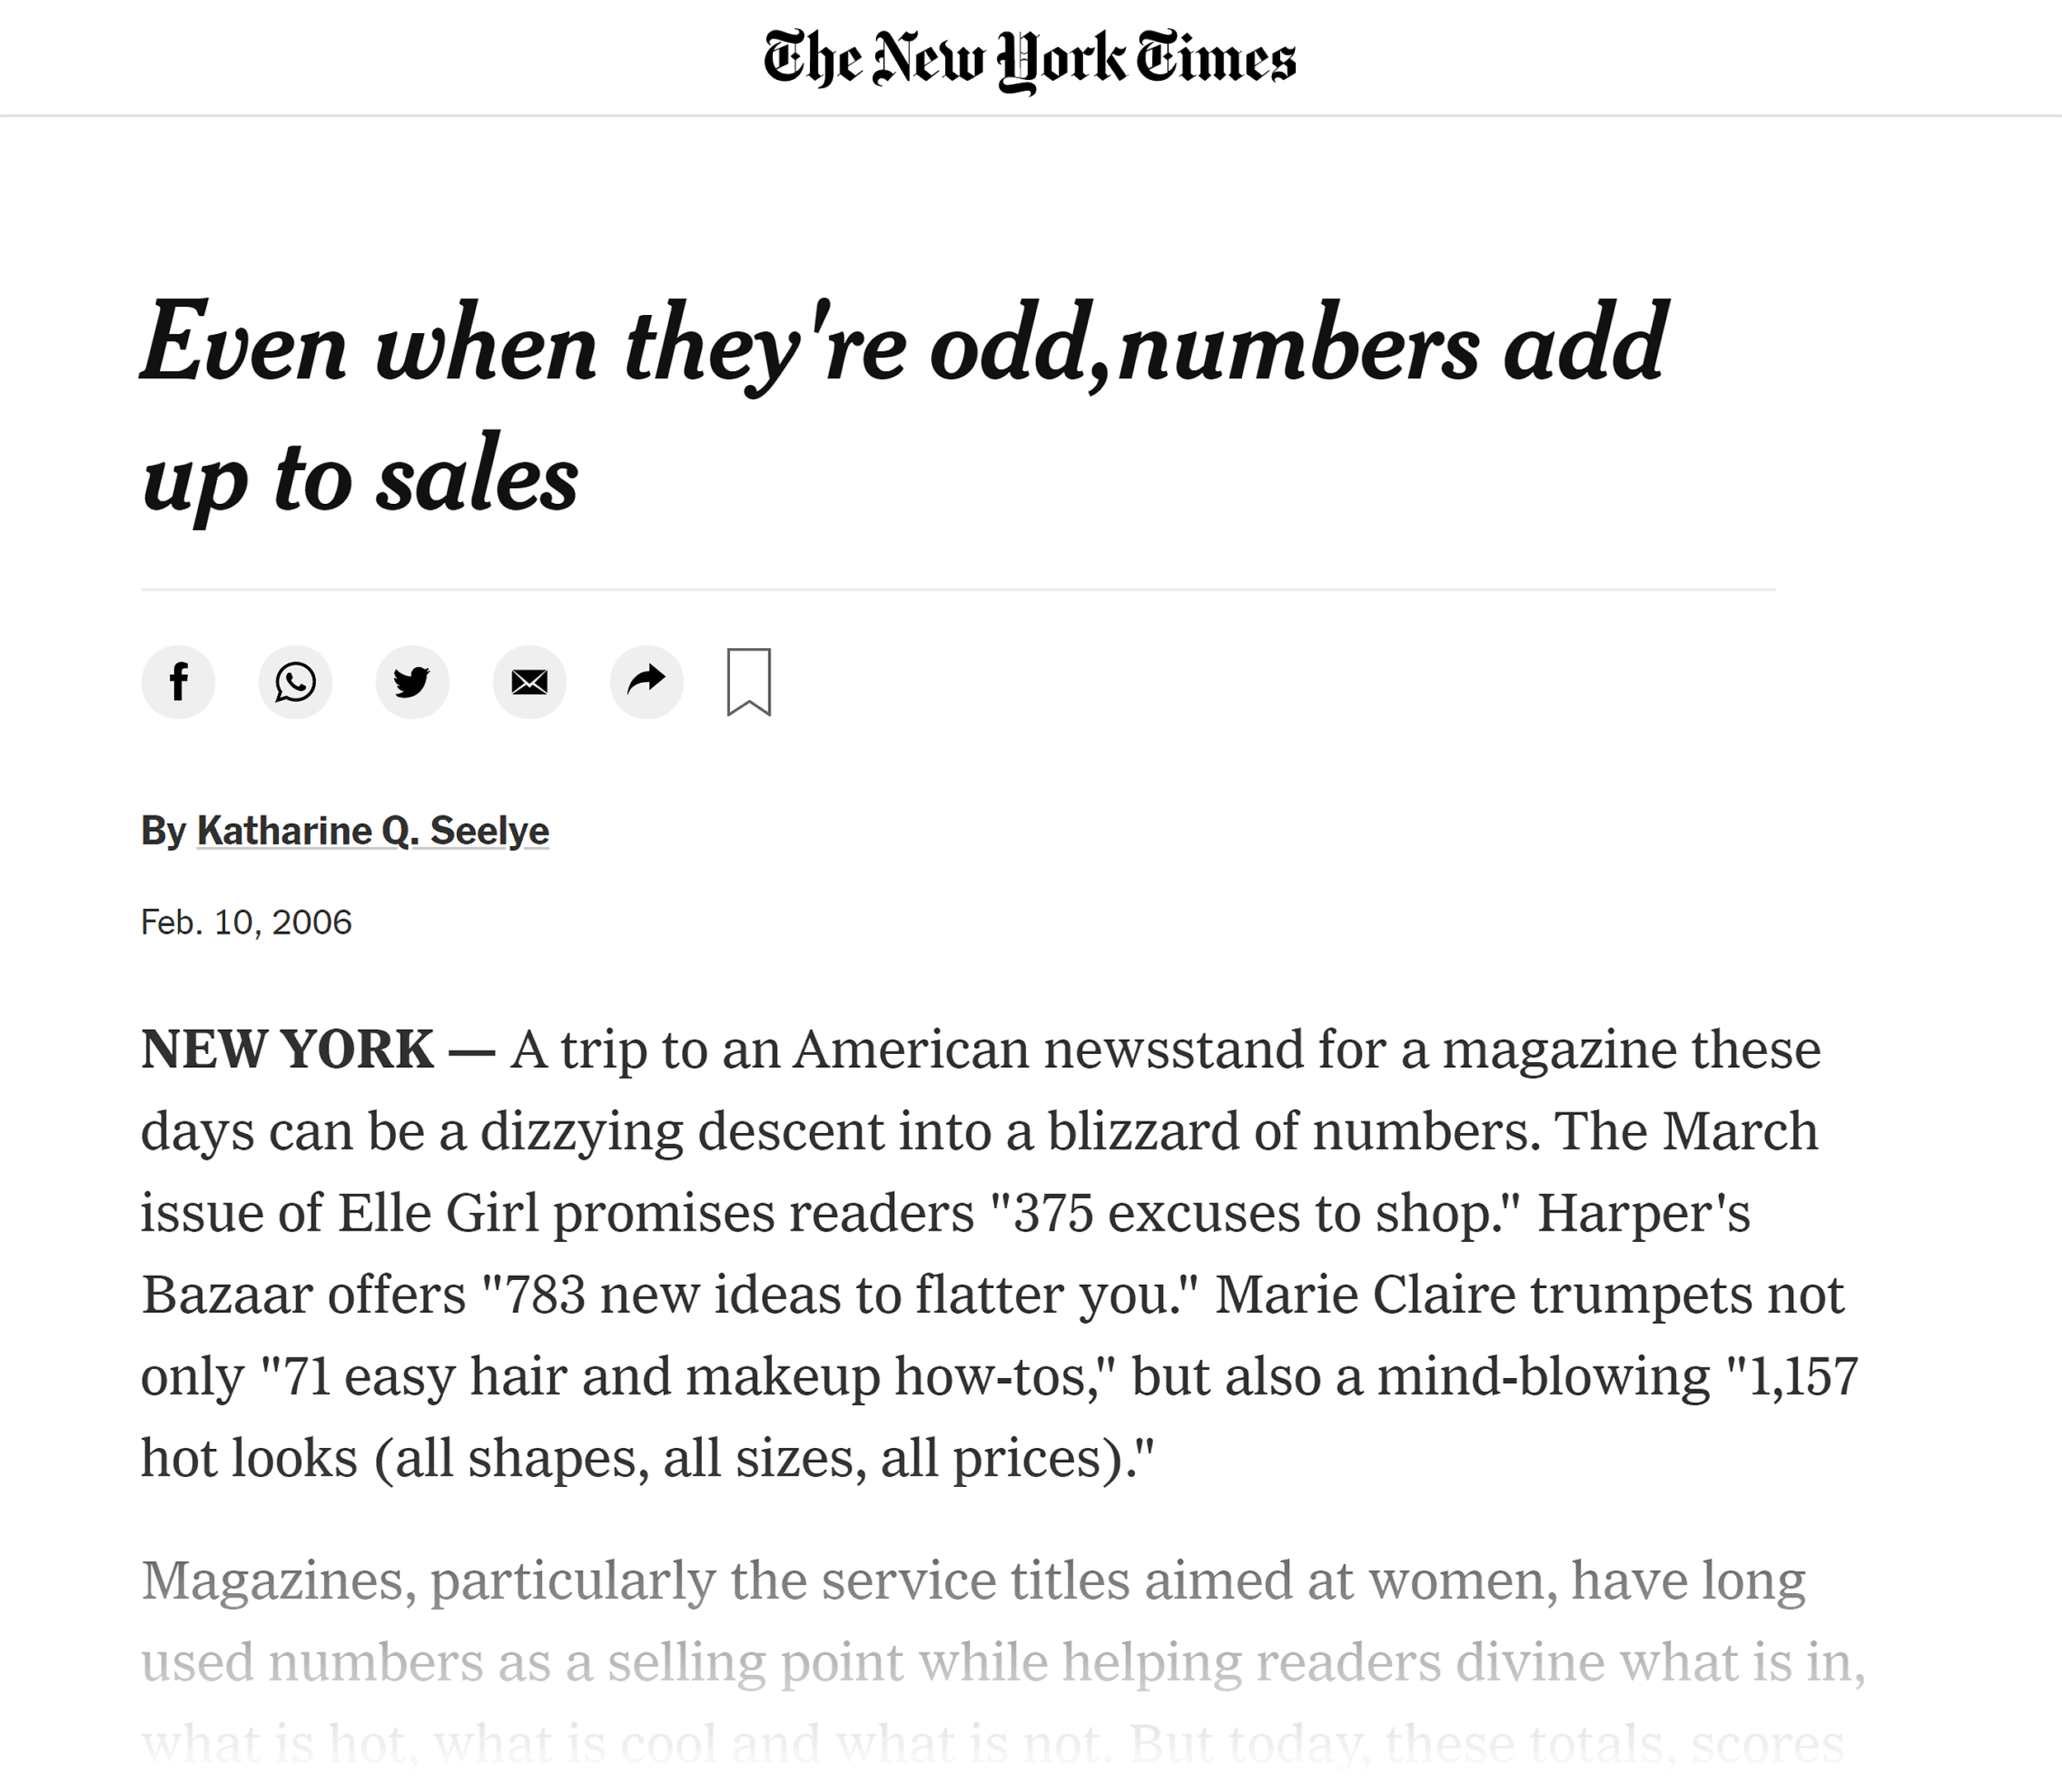 New York Times article on odd numbers